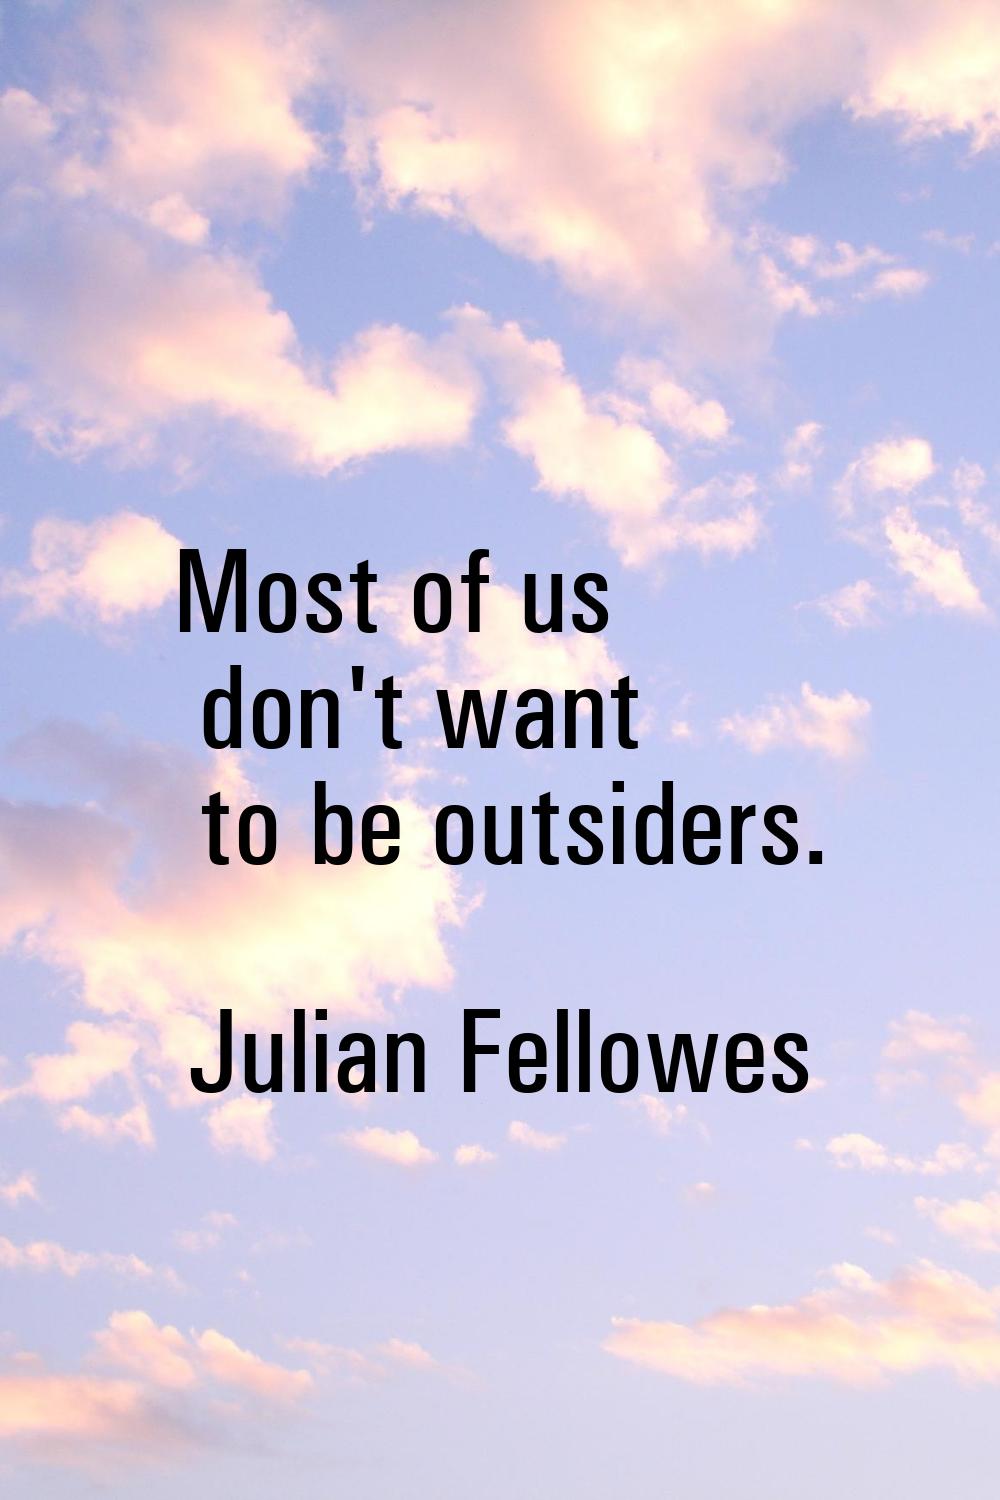 Most of us don't want to be outsiders.